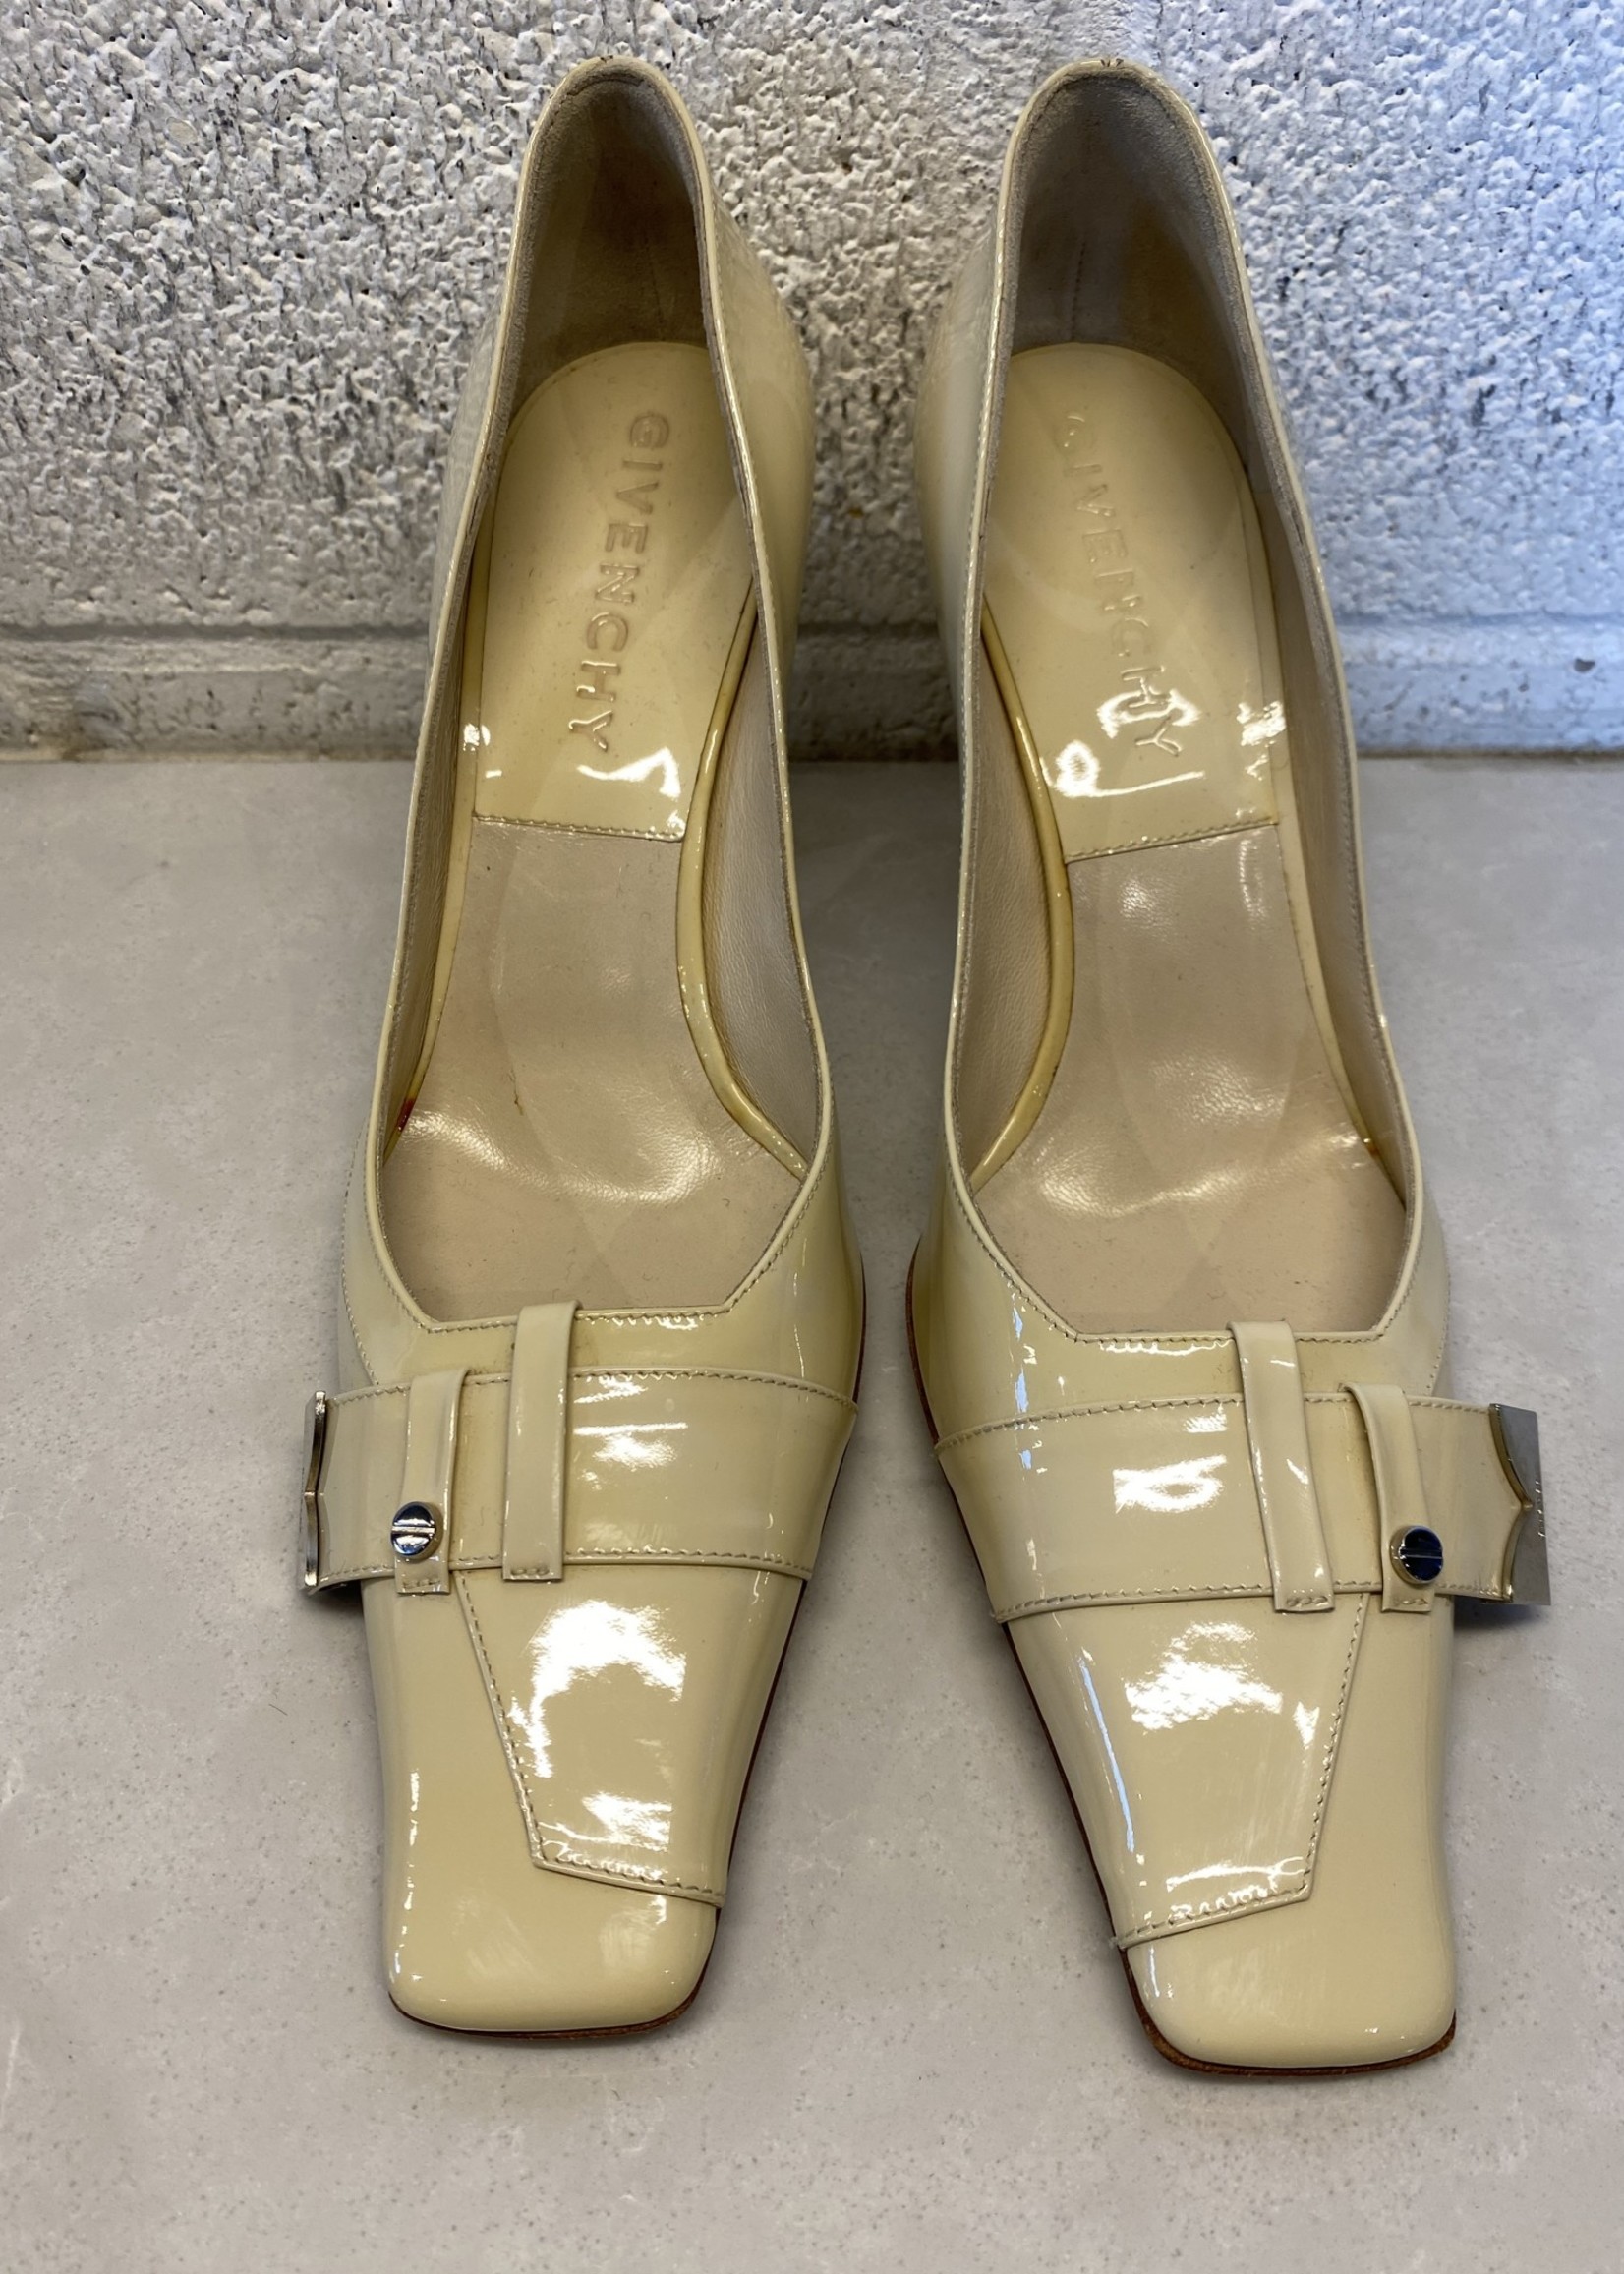 Givenchy Cream Patent Heels 36